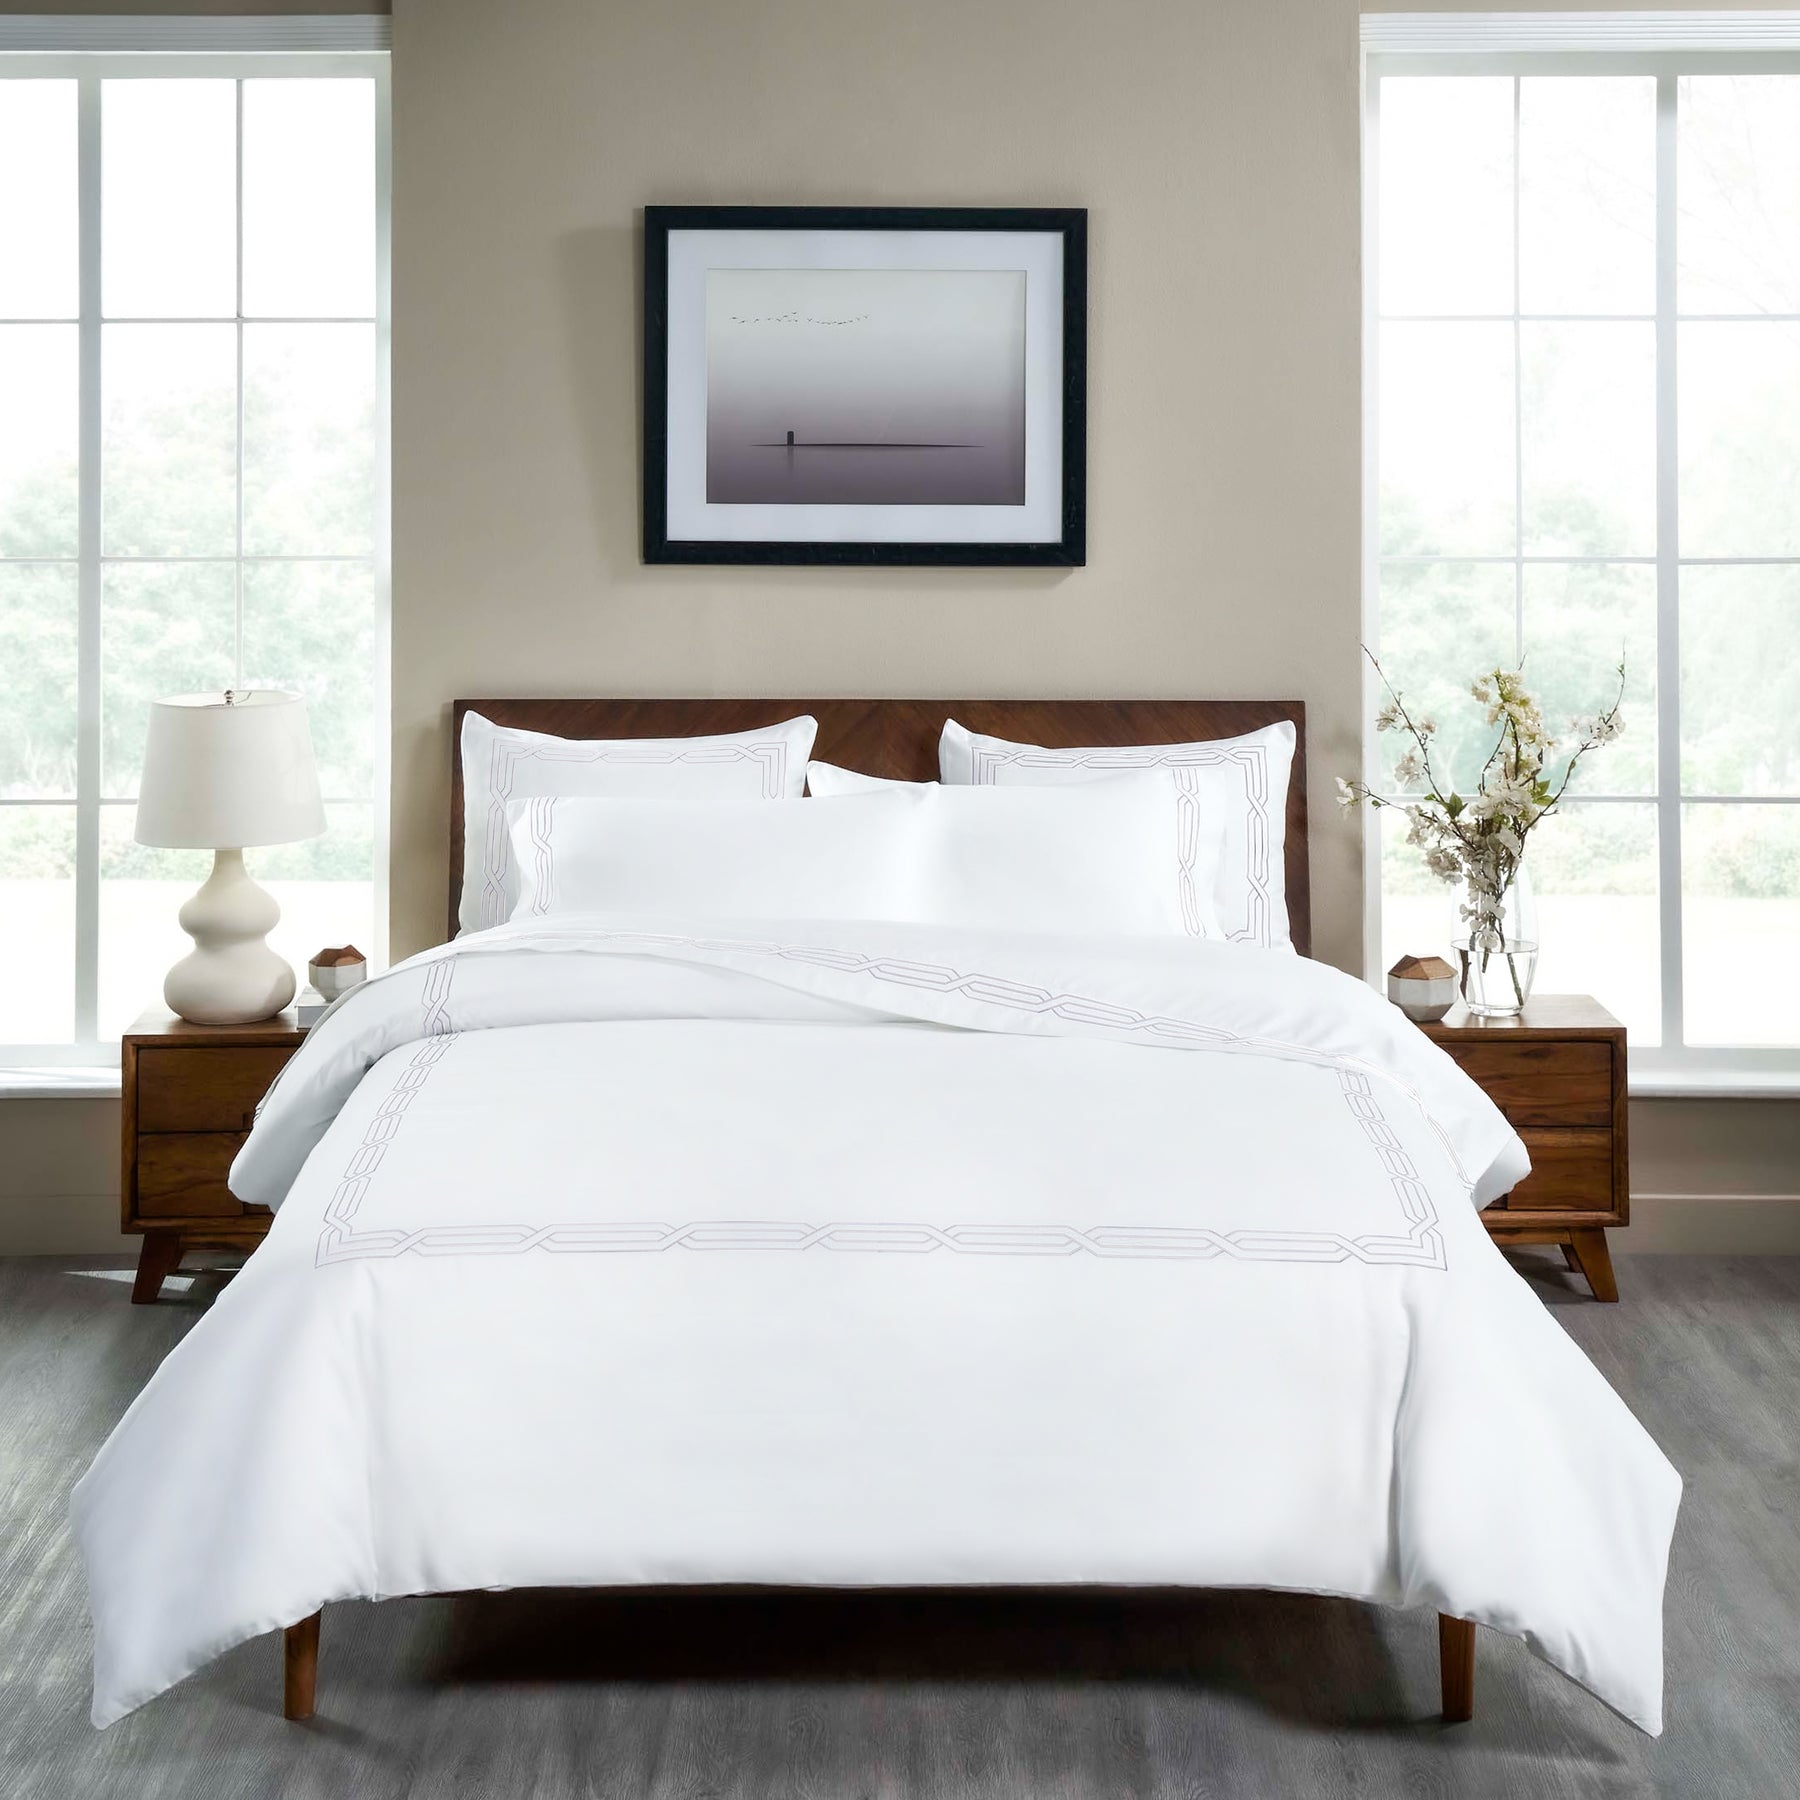 Superior Egyptian Cotton 1200 Thread Count Embroidered Geometric Scroll Duvet Cover Set - White-White